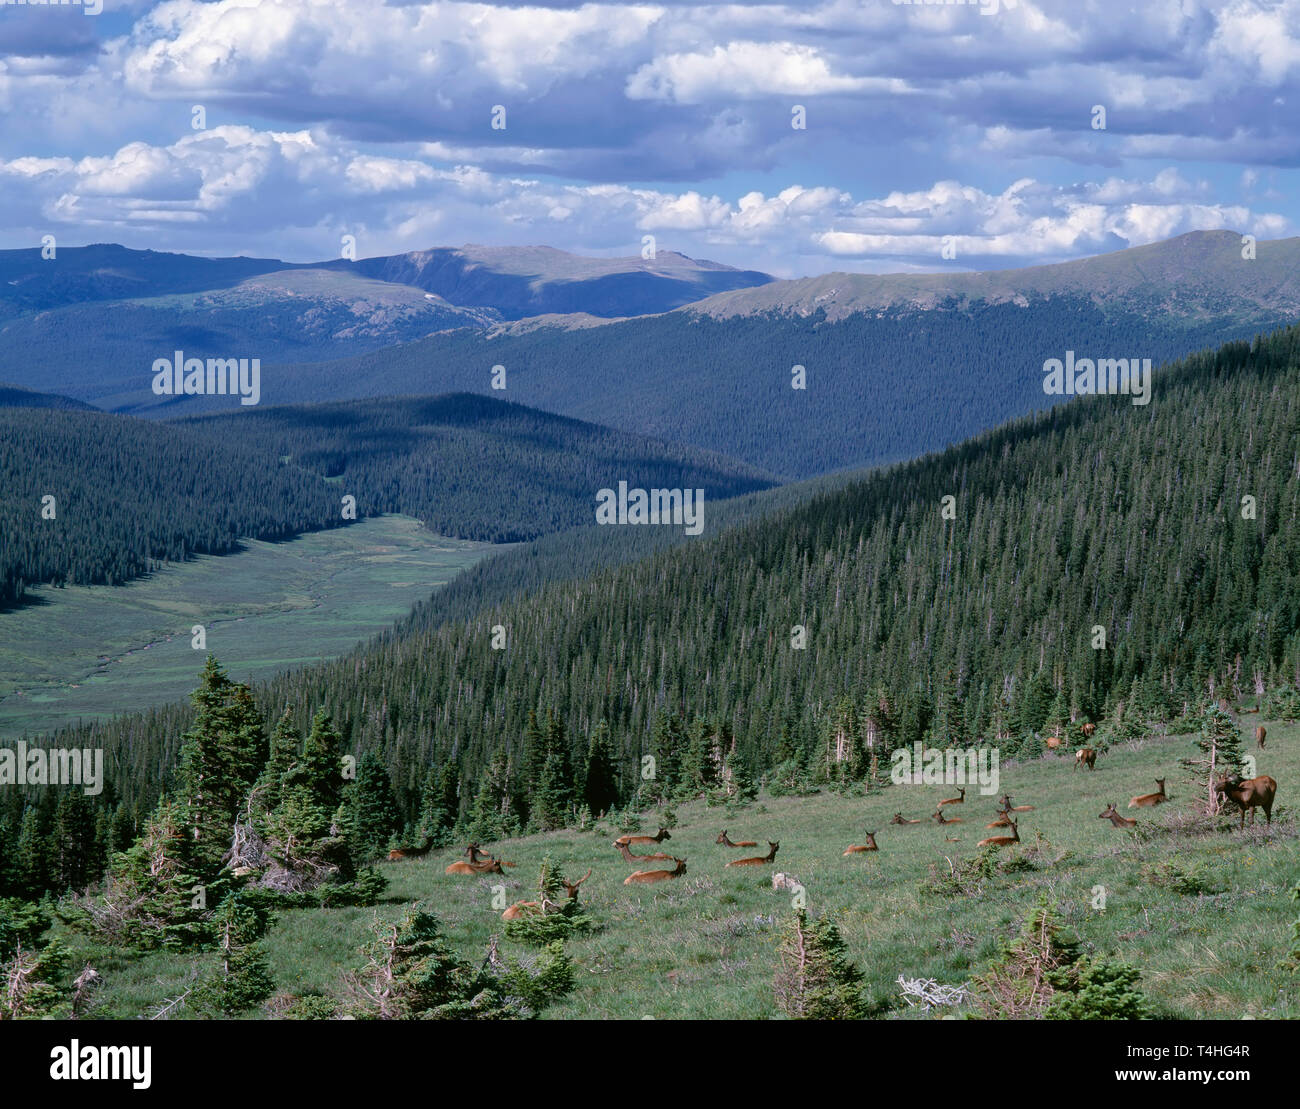 USA, Colorado, Rocky Mountain National Park, Herd of Rocky Mountain Elk in meadow, headwaters of the Colorado River are in the lower distance. Stock Photo